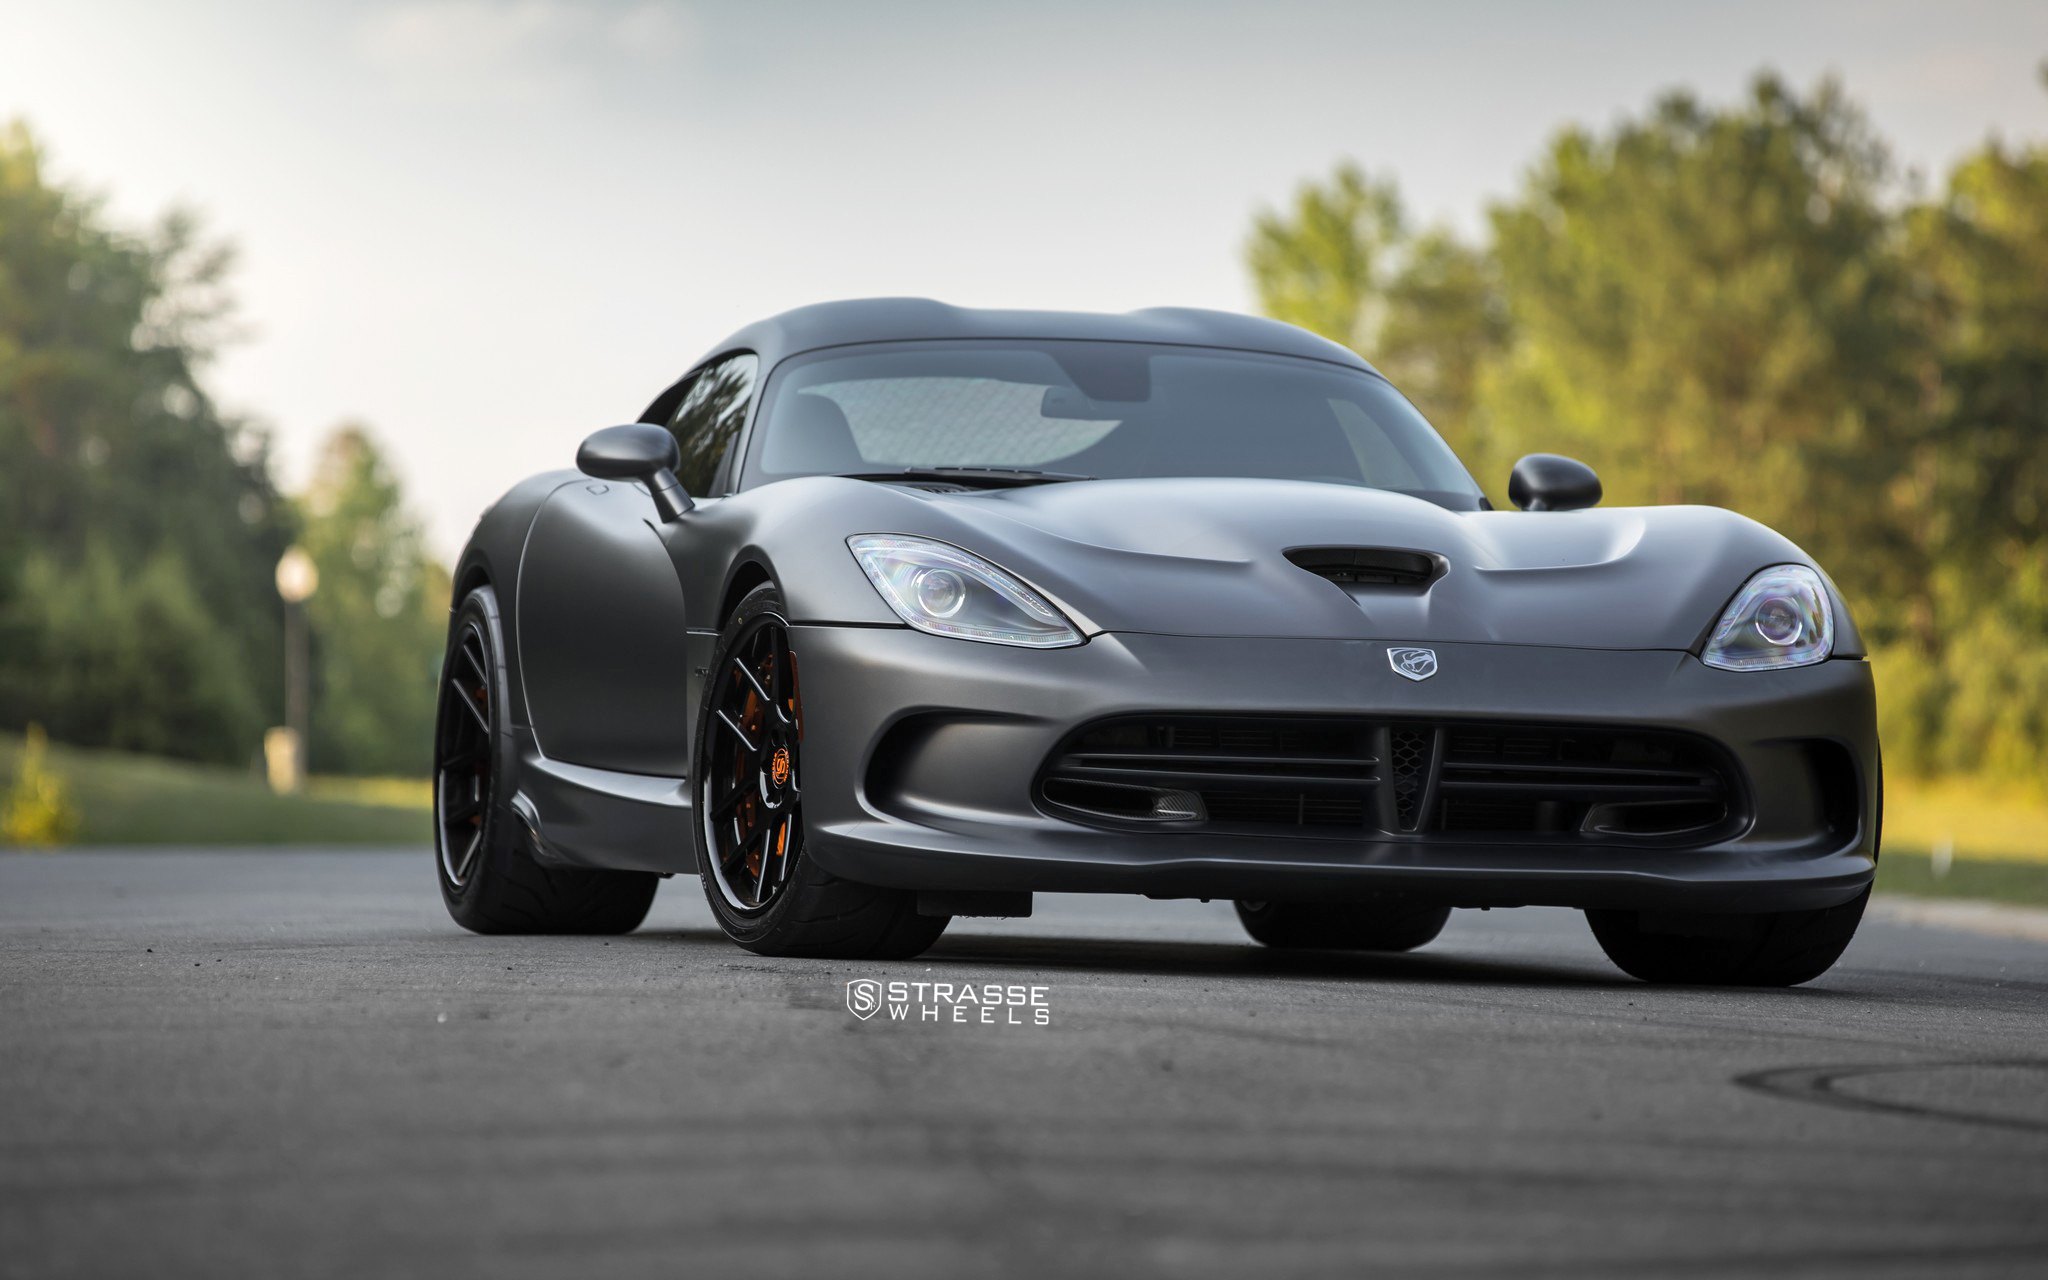 Aftermarket Front Bumper on Gray Dodge Viper - Photo by Strasse Forged